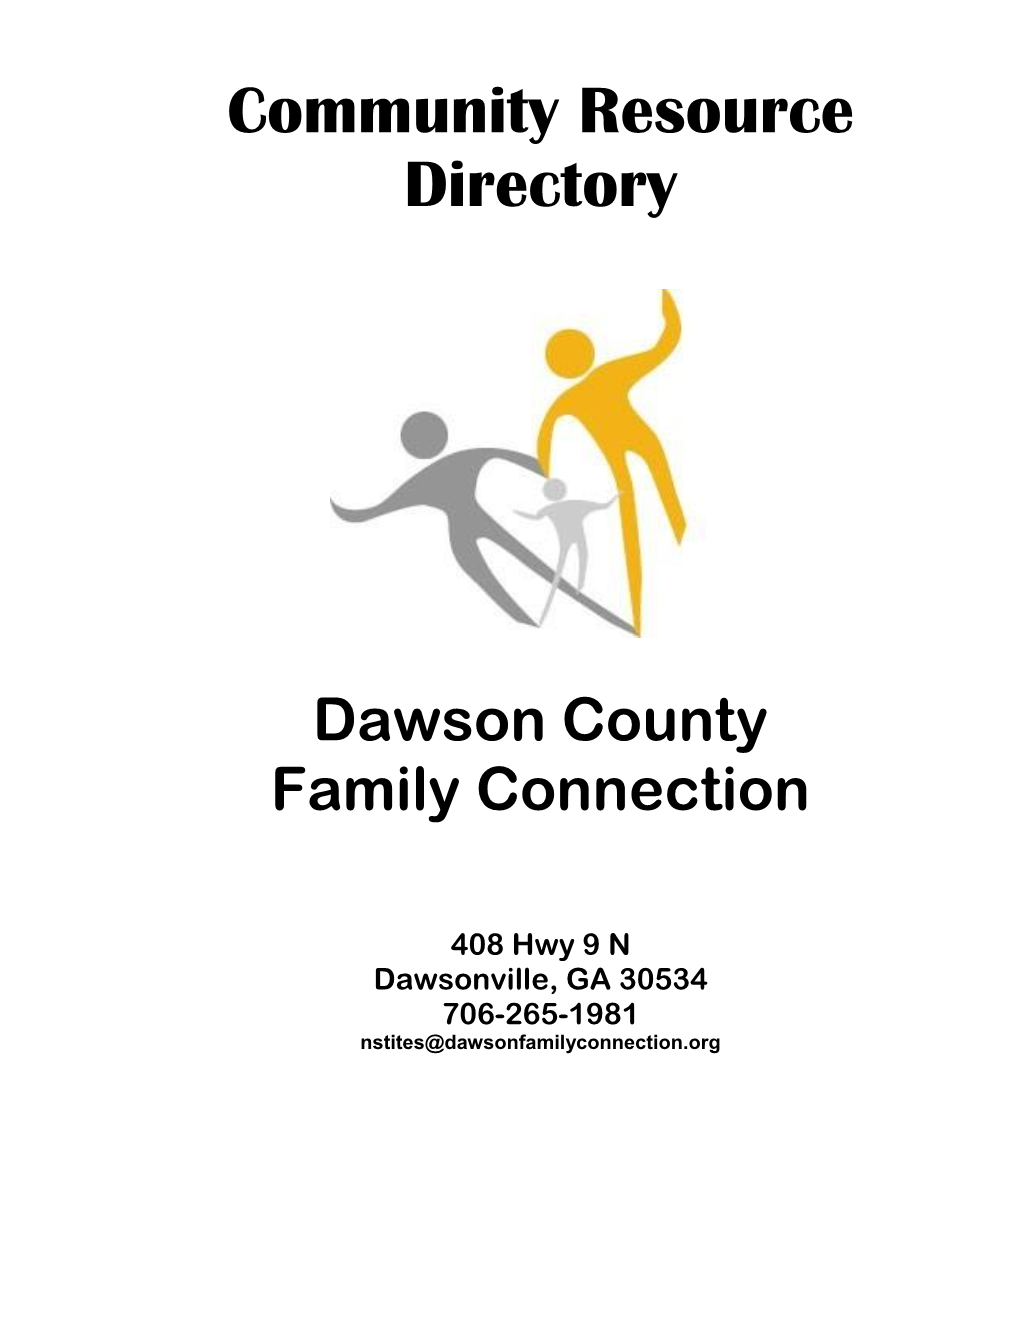 Dawson County Family Connection